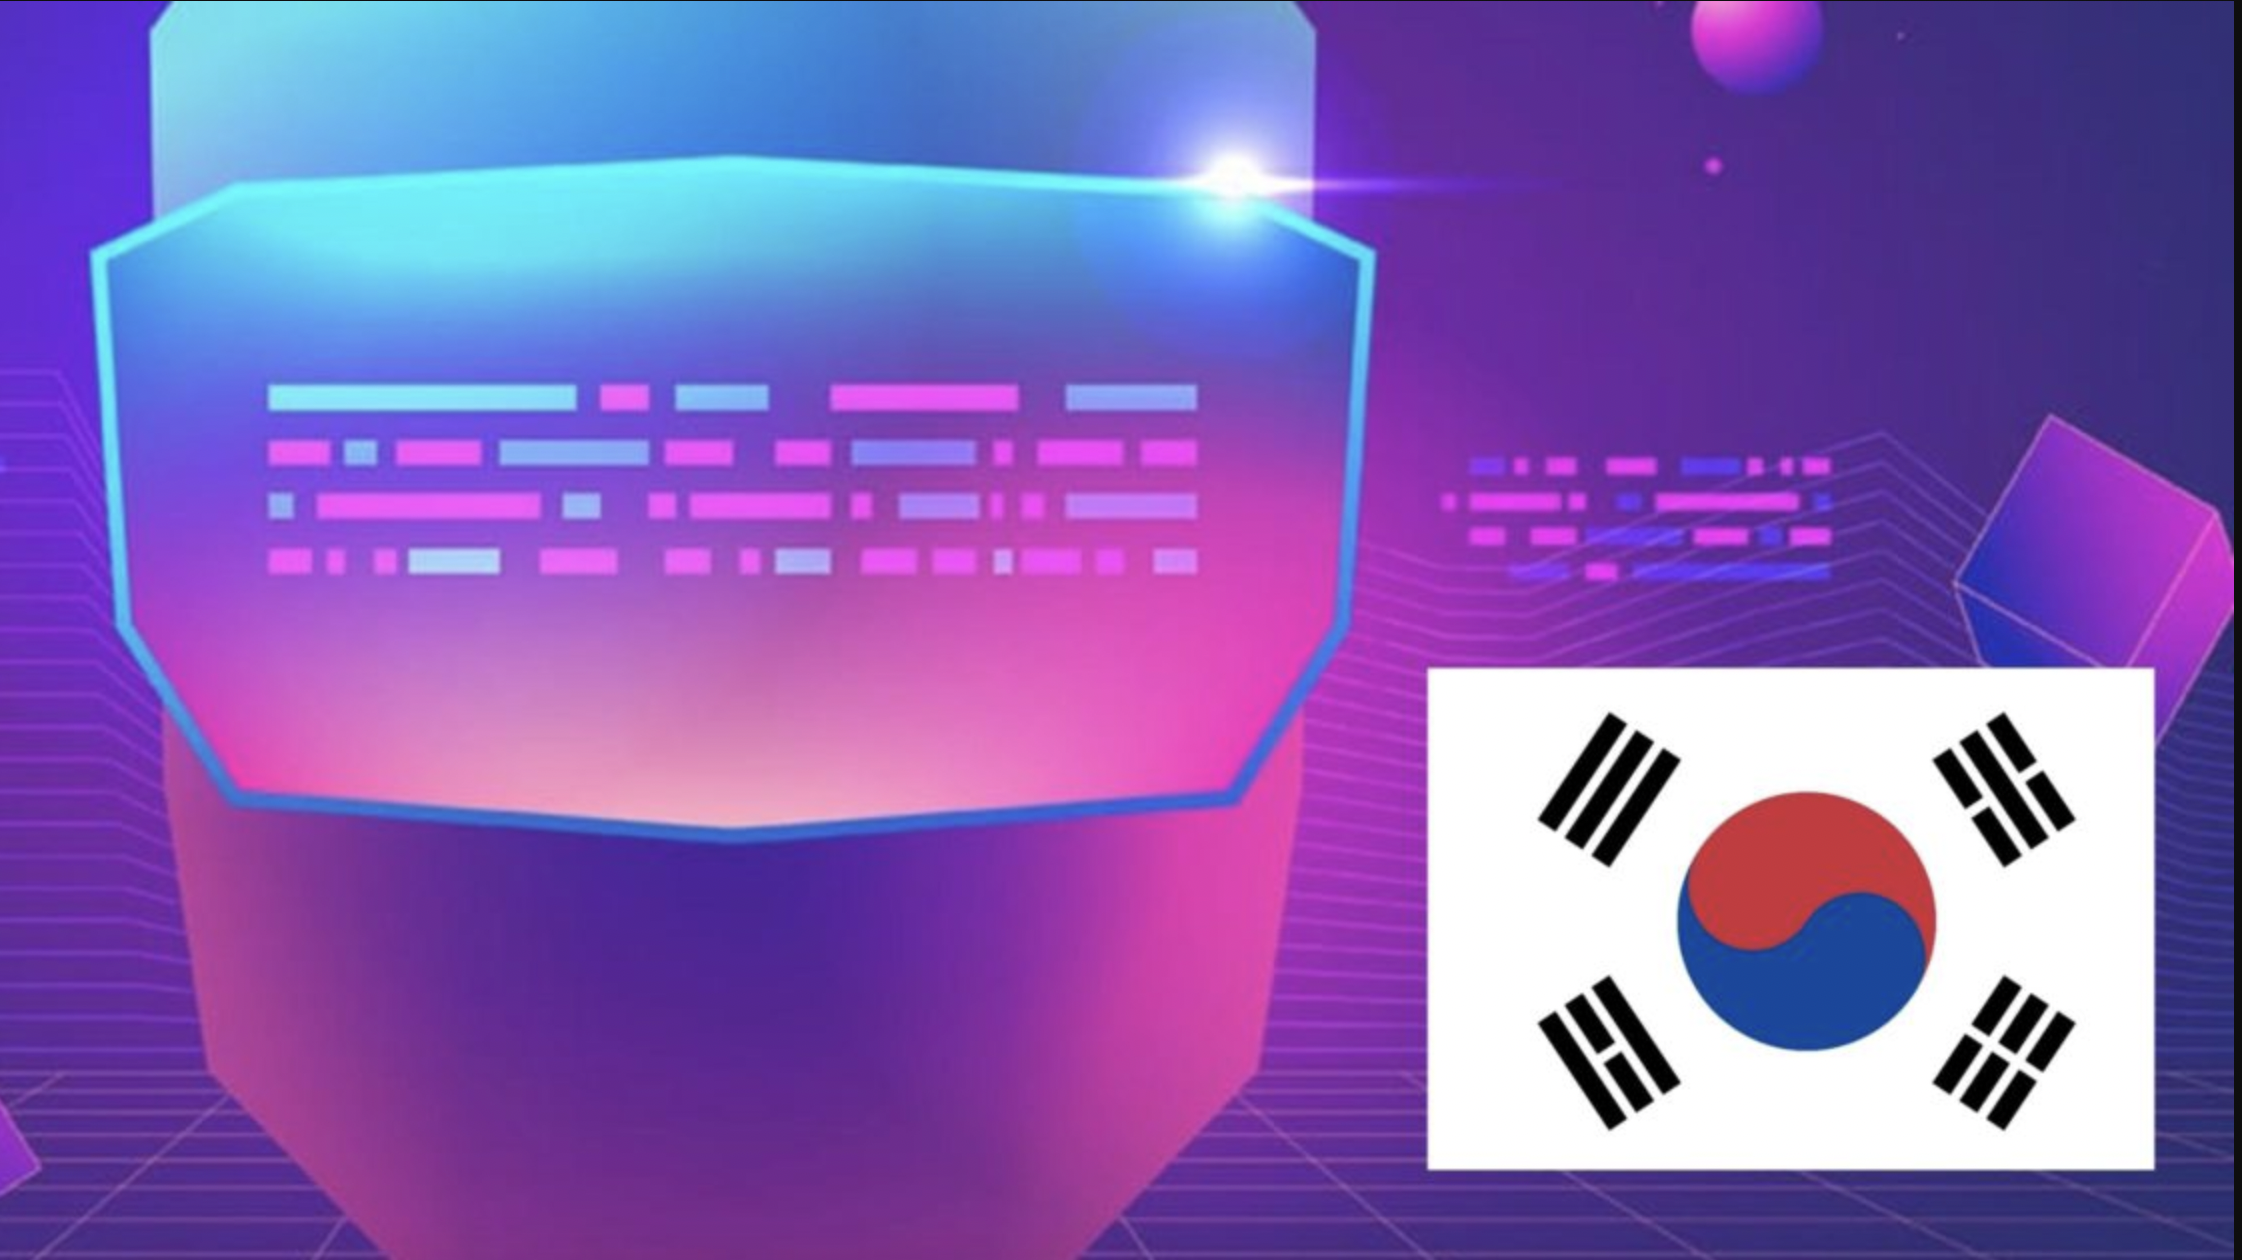 South Korea’s Ministry of Science & ICT to Enact Metaverse Plan to Boost Economy